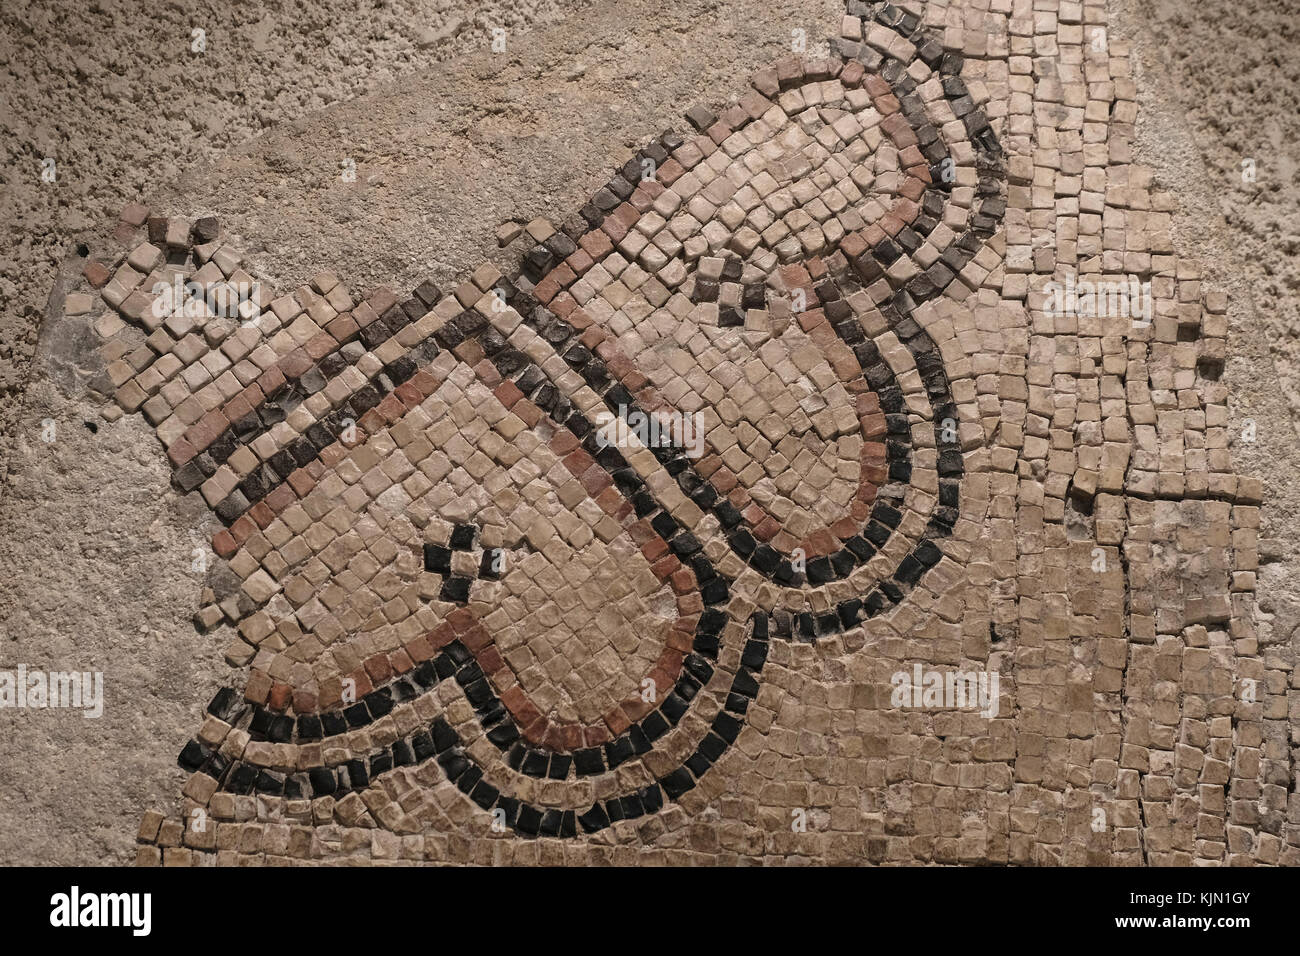 Remains of a floor mosaic uncovered at the site, which was  part of a residential quarter in the time of the Herodian Dynasty (37 BCE 70 CE) located in The Wohl Museum of Archeology also called The Herodian Quarter below the level of the present Jewish Quarter in the Old City East Jerusalem Israel. Stock Photo